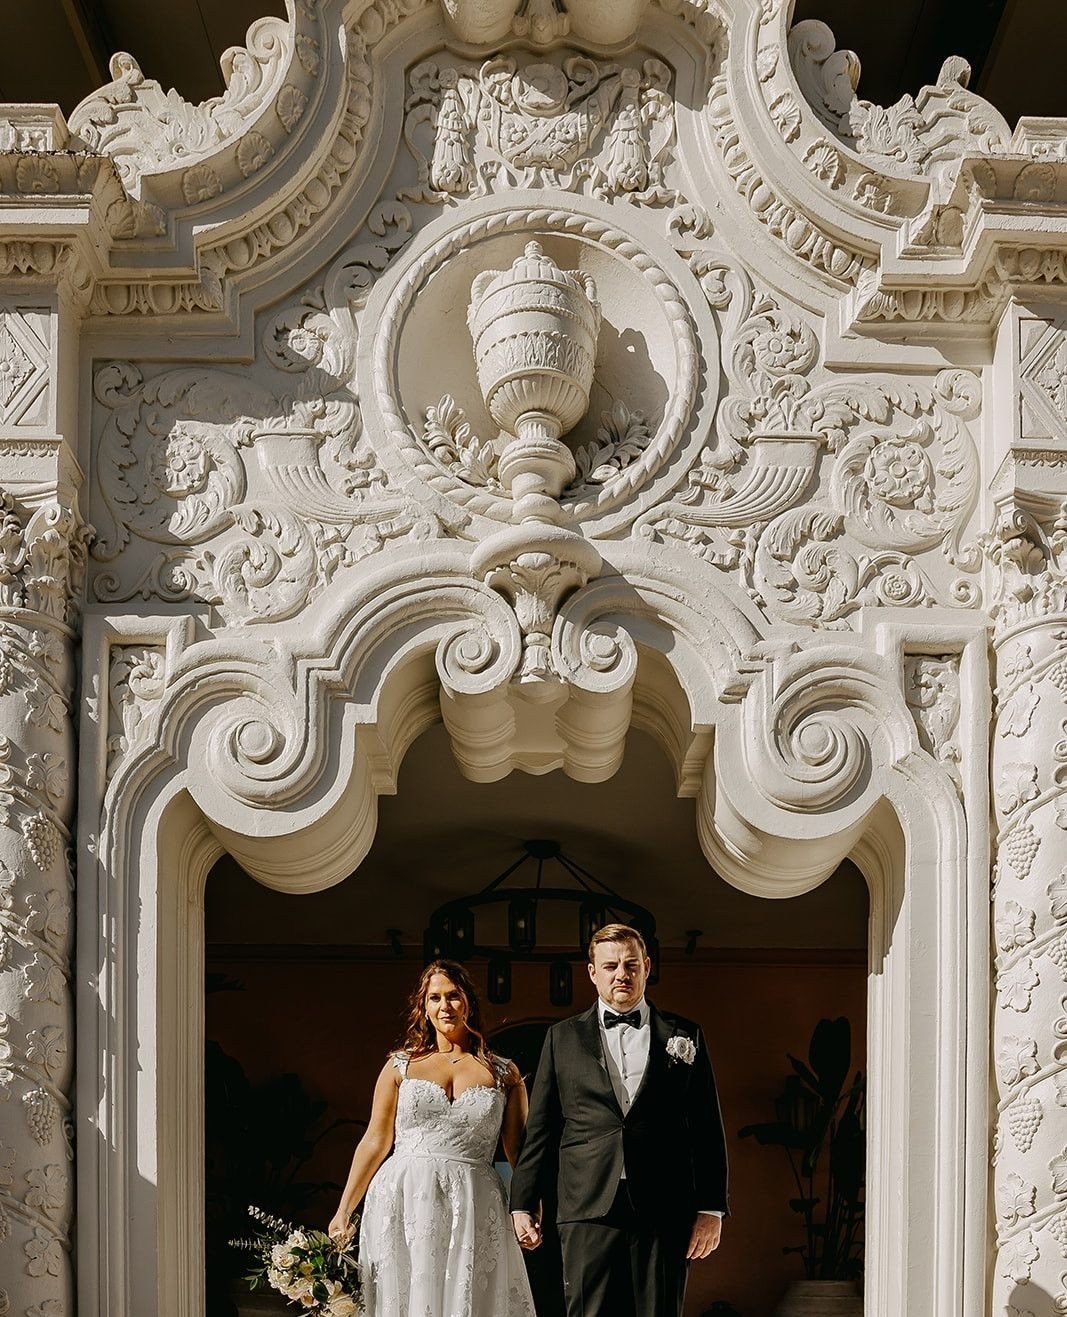 Introducing Mr &amp; Mrs Shields 🥂✨⁠
⁠
A stunning Vinoy wedding of our dreams, and it was all thanks to some incredible vendors 🤩⁠
⁠
#makeyourweddingrad ⁠
@laurminella⁠
@realdjshields⁠
⁠
vendors___⁠
@vinoywed⁠
@coastalcoordinating⁠
@caylacoastal⁠
@